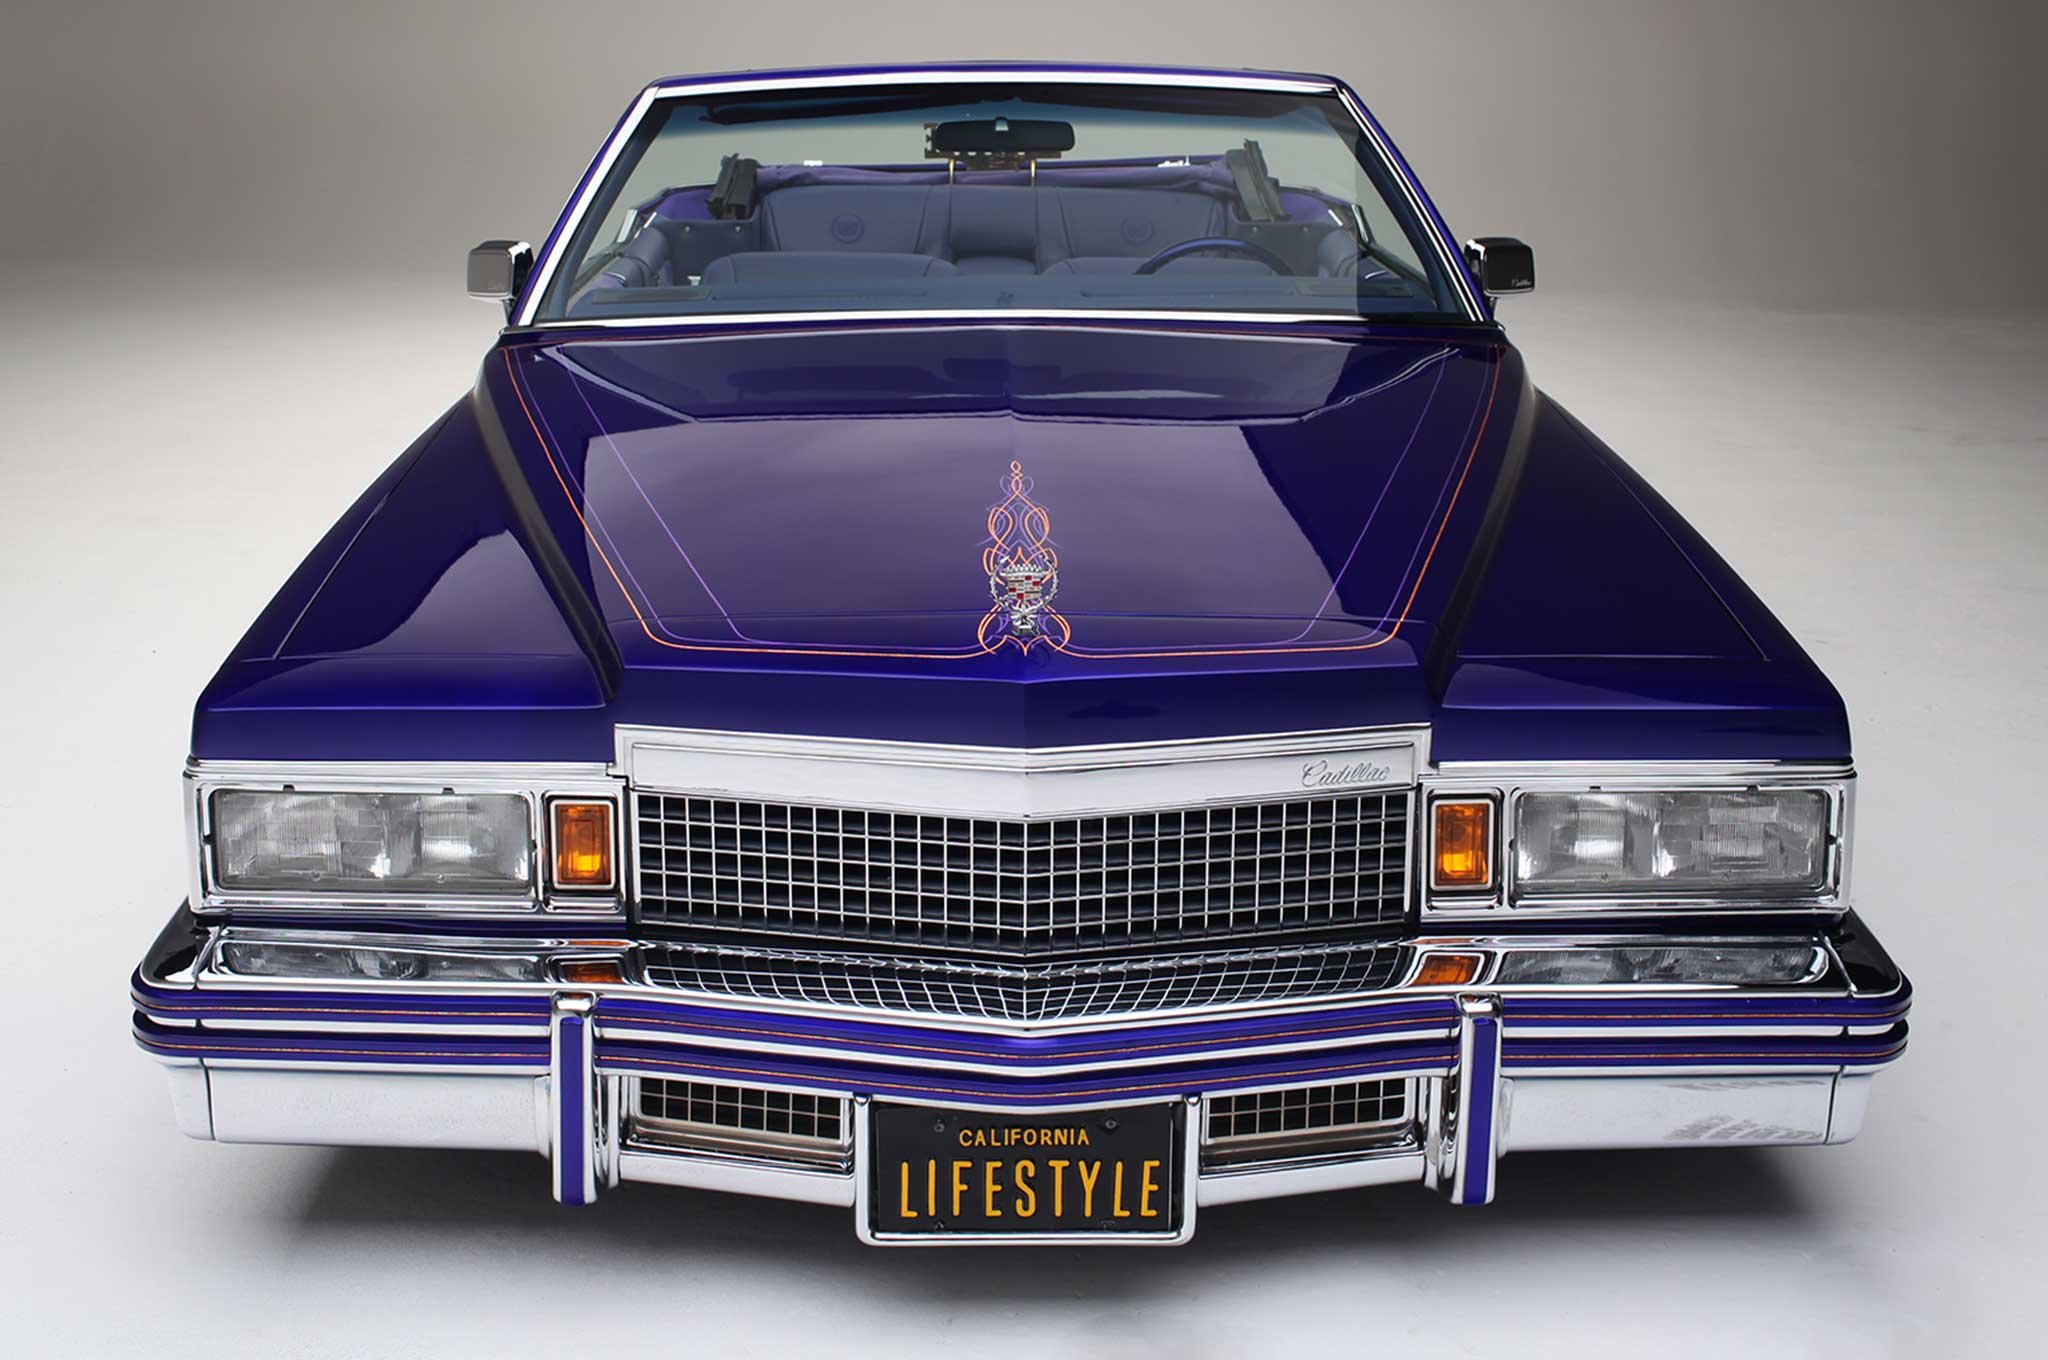 Download hd wallpapers of 971524-1979, Cadillac, Le, Cabriolet, Custom, Tun...